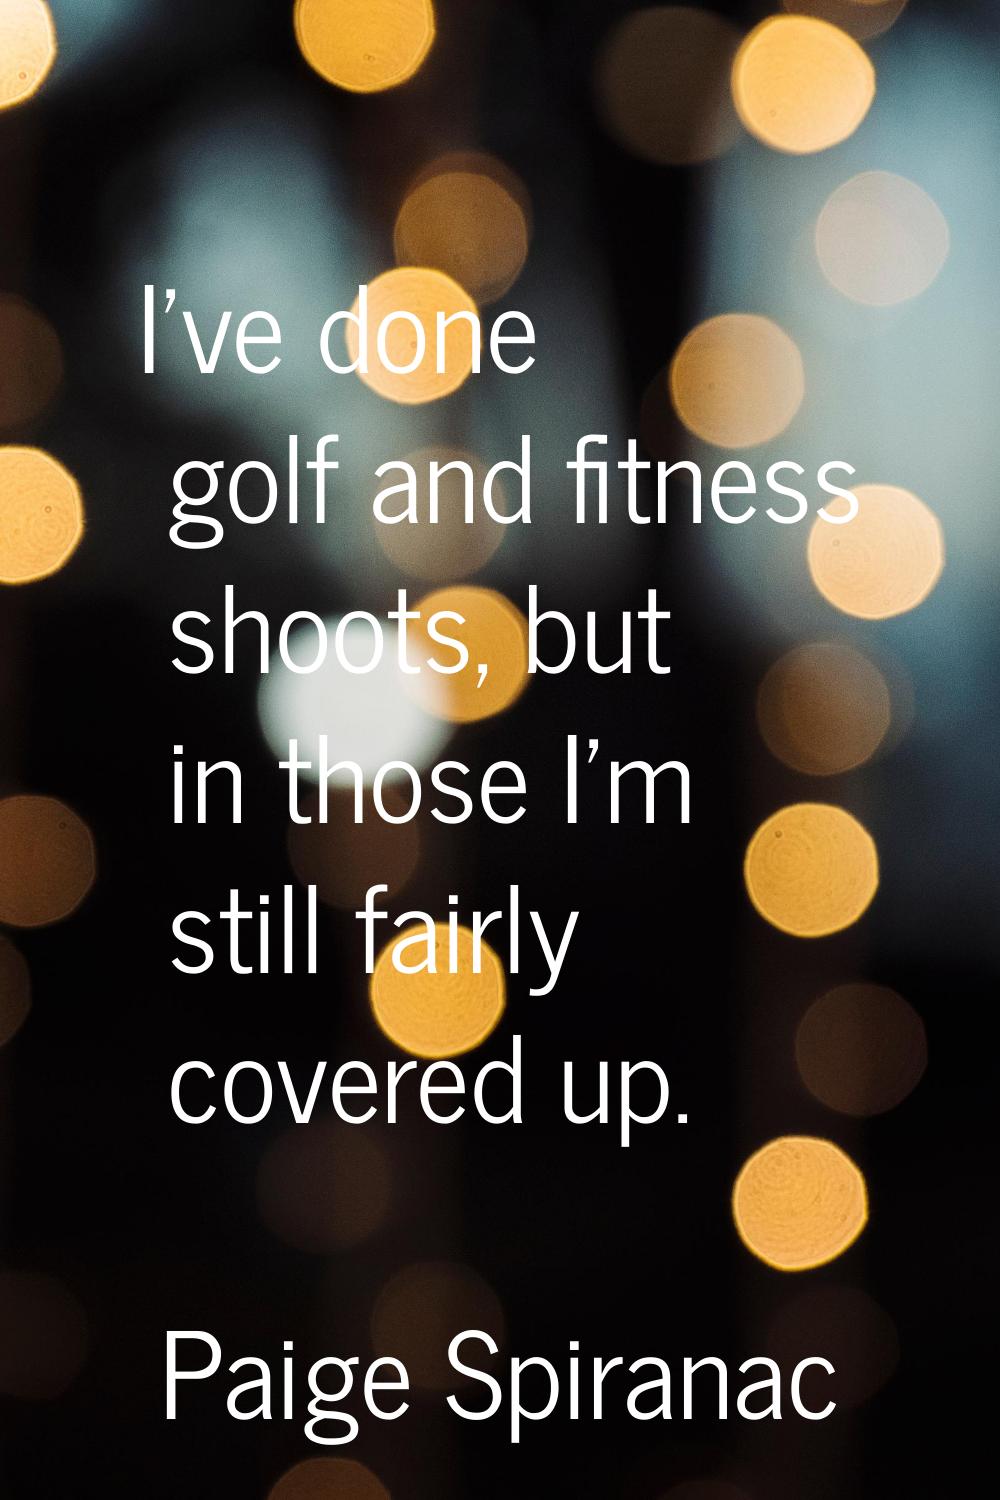 I've done golf and fitness shoots, but in those I'm still fairly covered up.